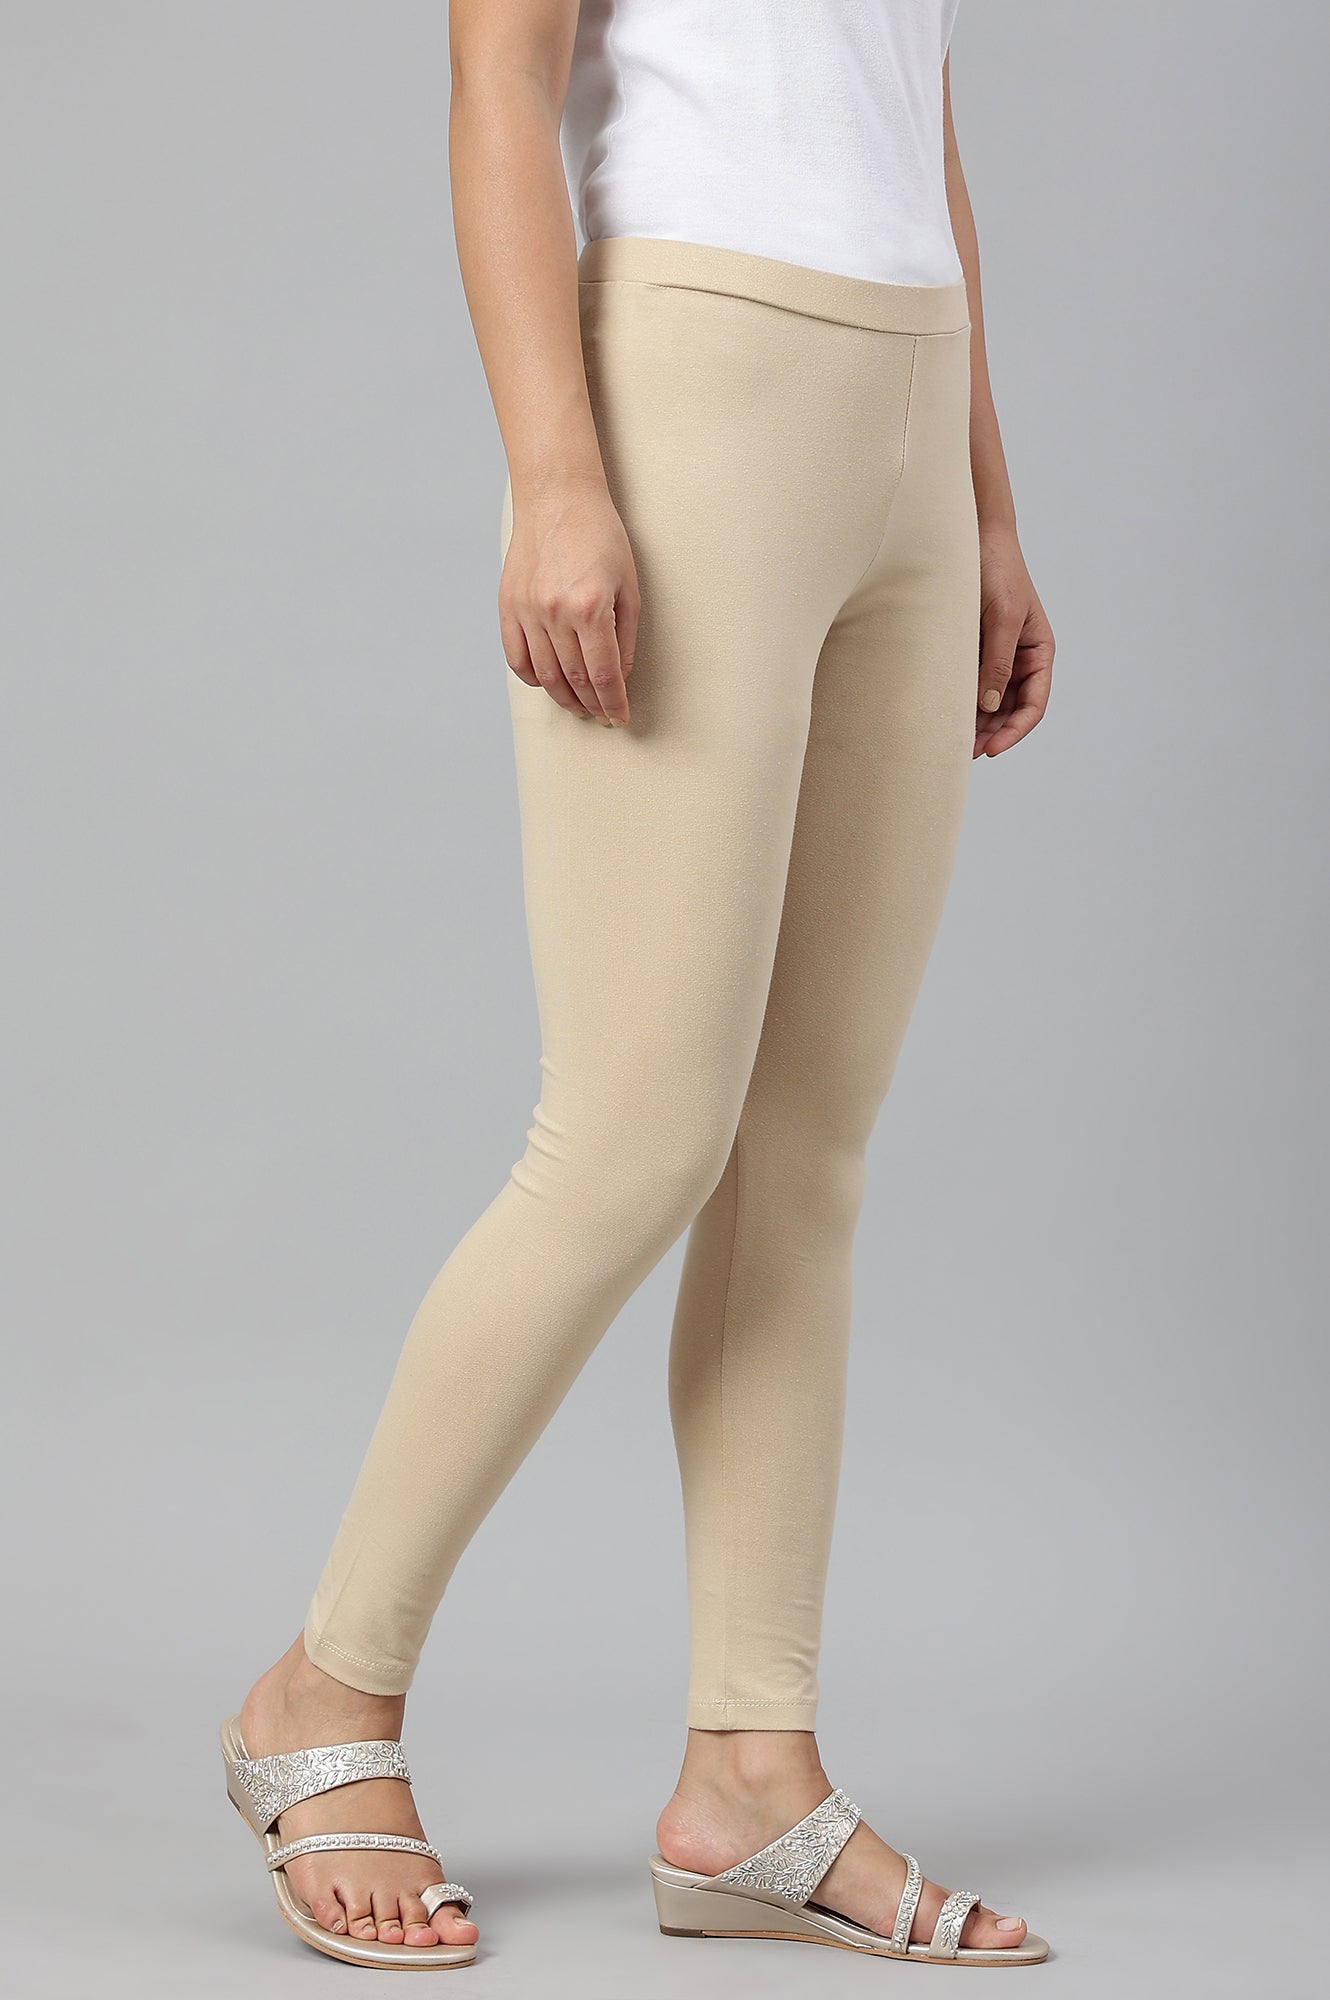 Beige Knitted Cotton Lycra Tights